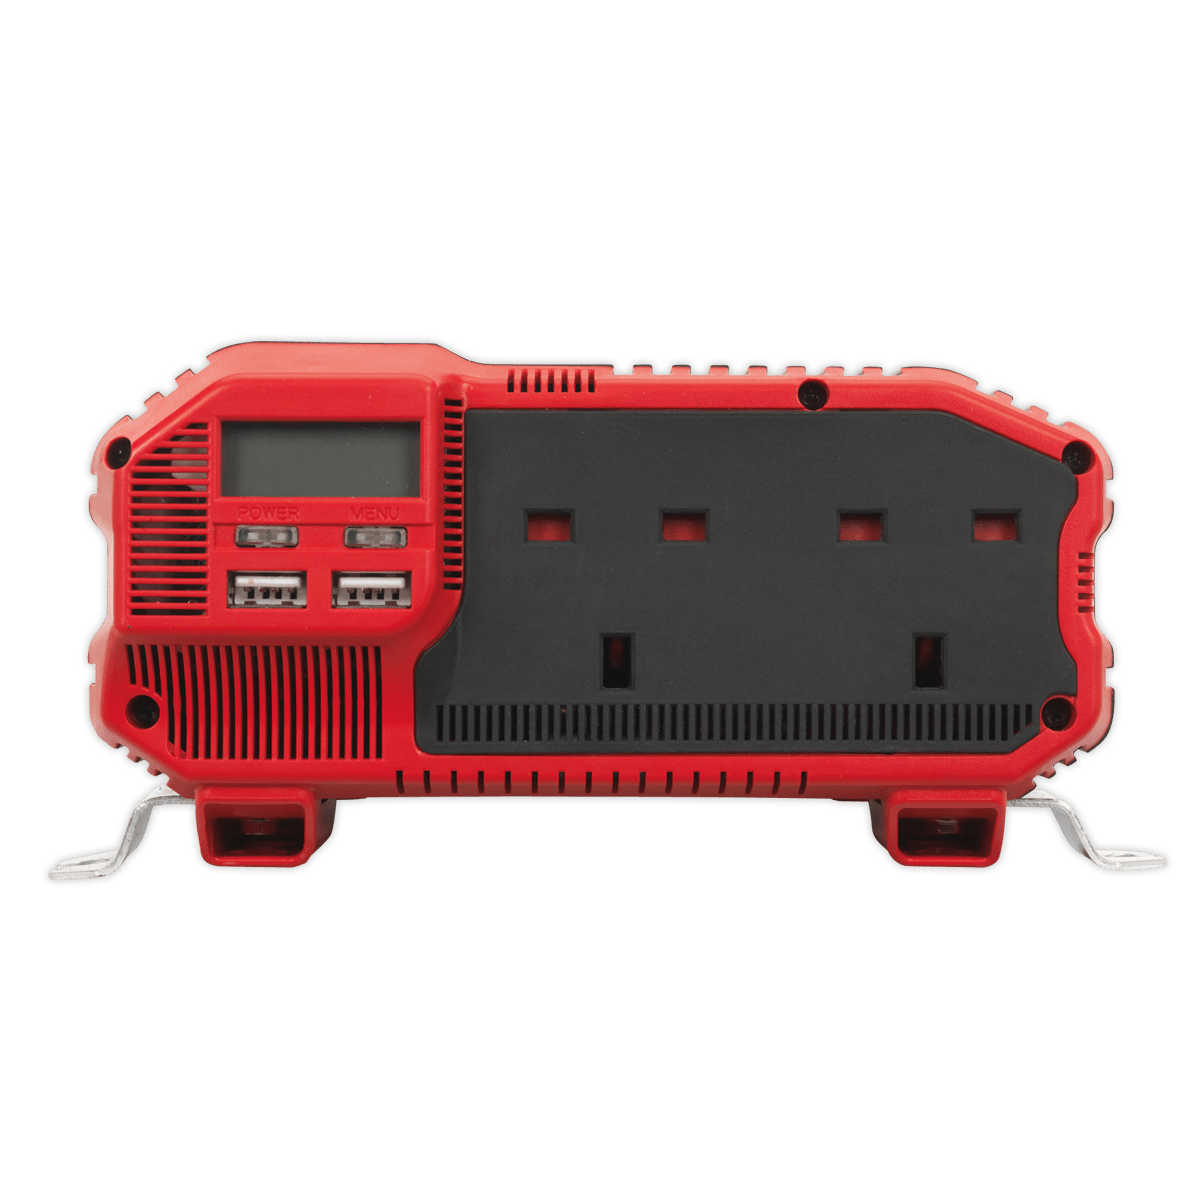 Power Inverter Modified Sine Wave 1500W 12V DC - 230V~50Hz | Supplies continuous smooth 230V power from 12V DC power supply found in cars, caravans, boats and commercials. | toolforce.ie